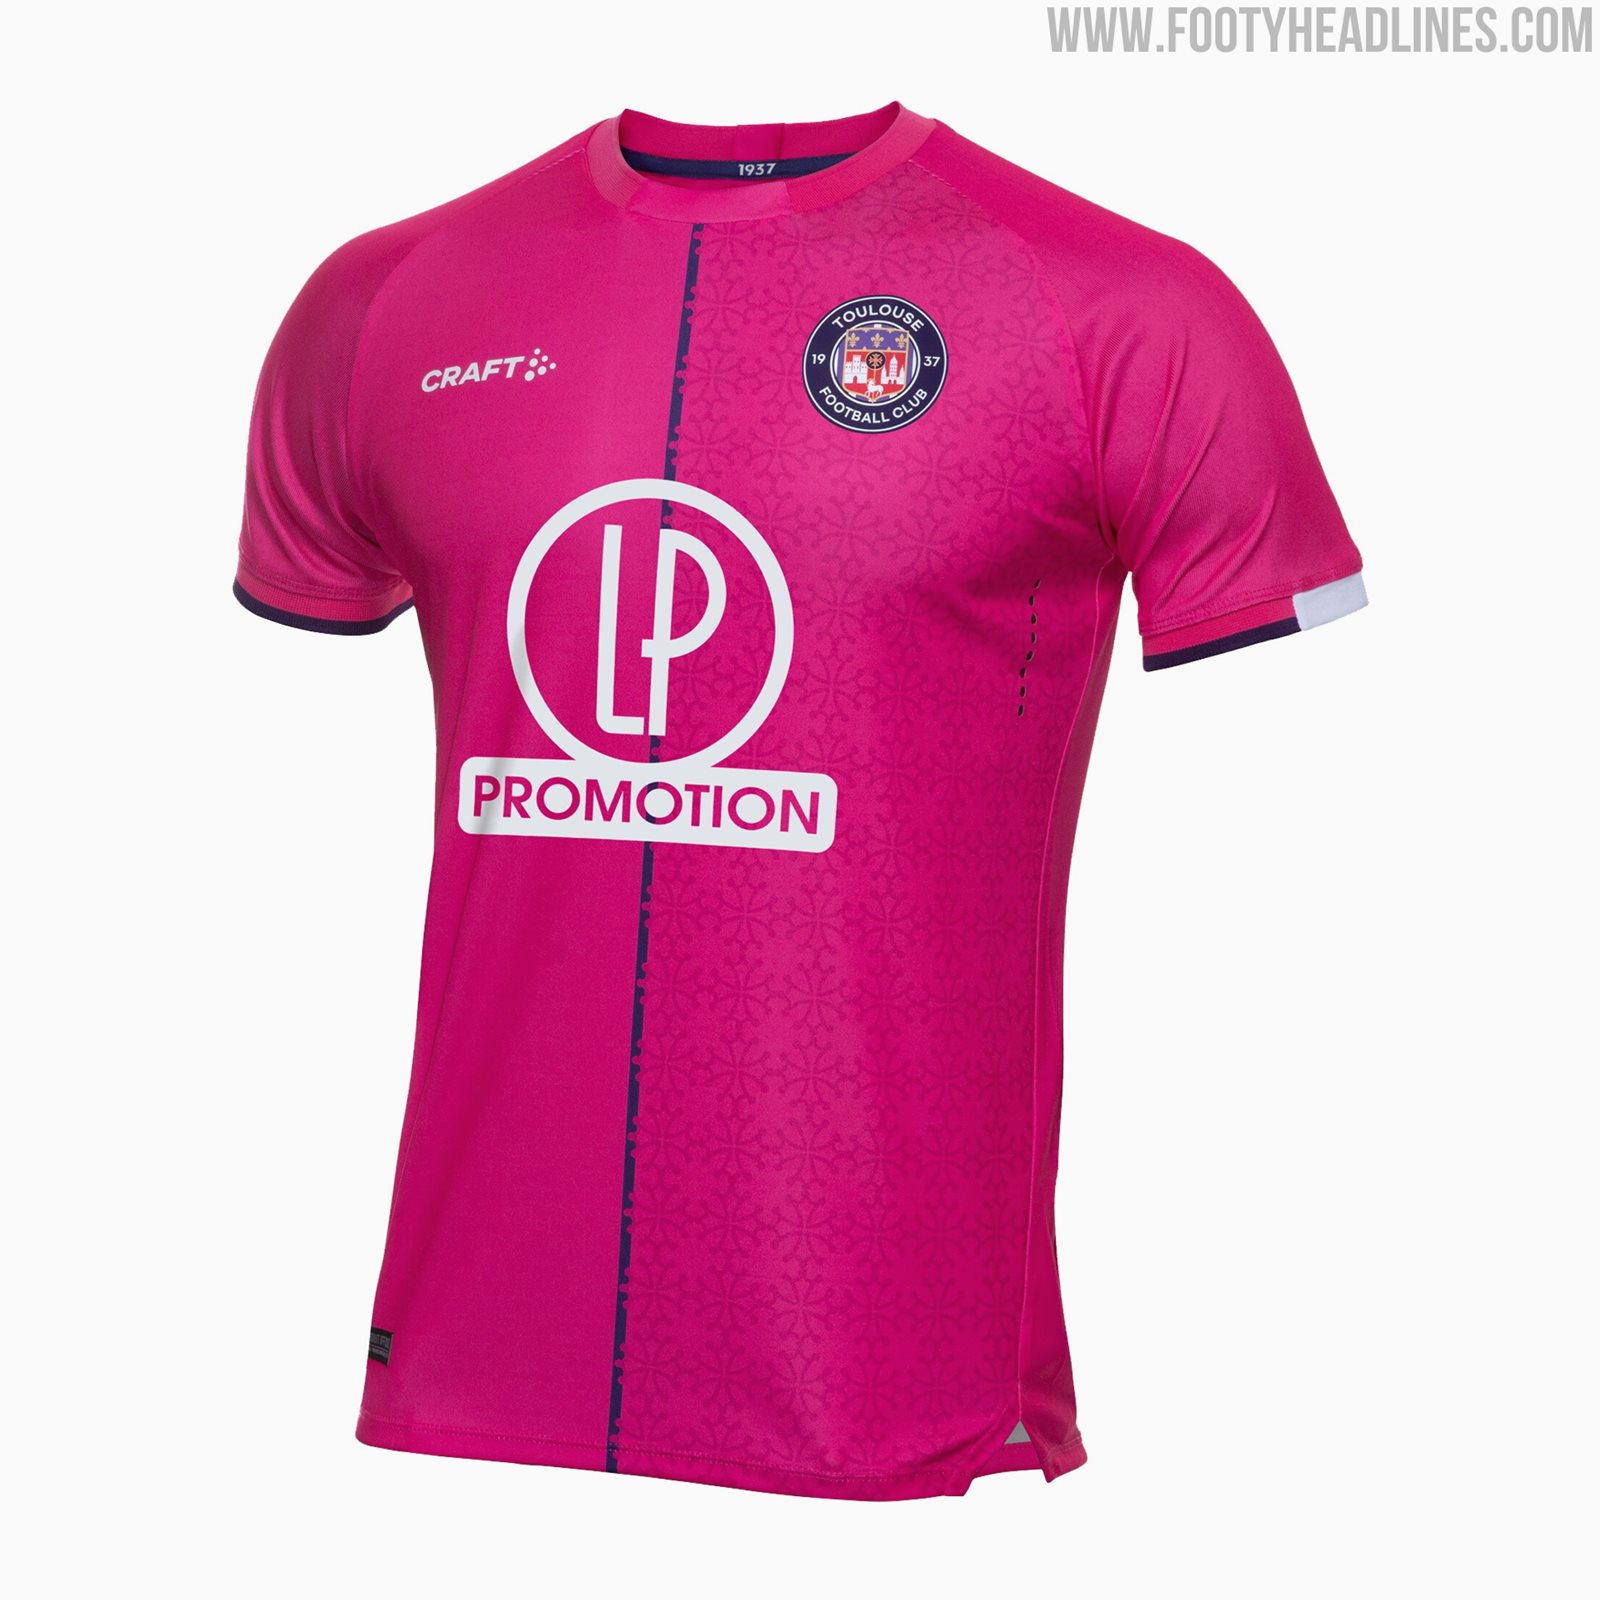 Craft Toulouse 21-22 Home & Away Kits Released - No More Joma